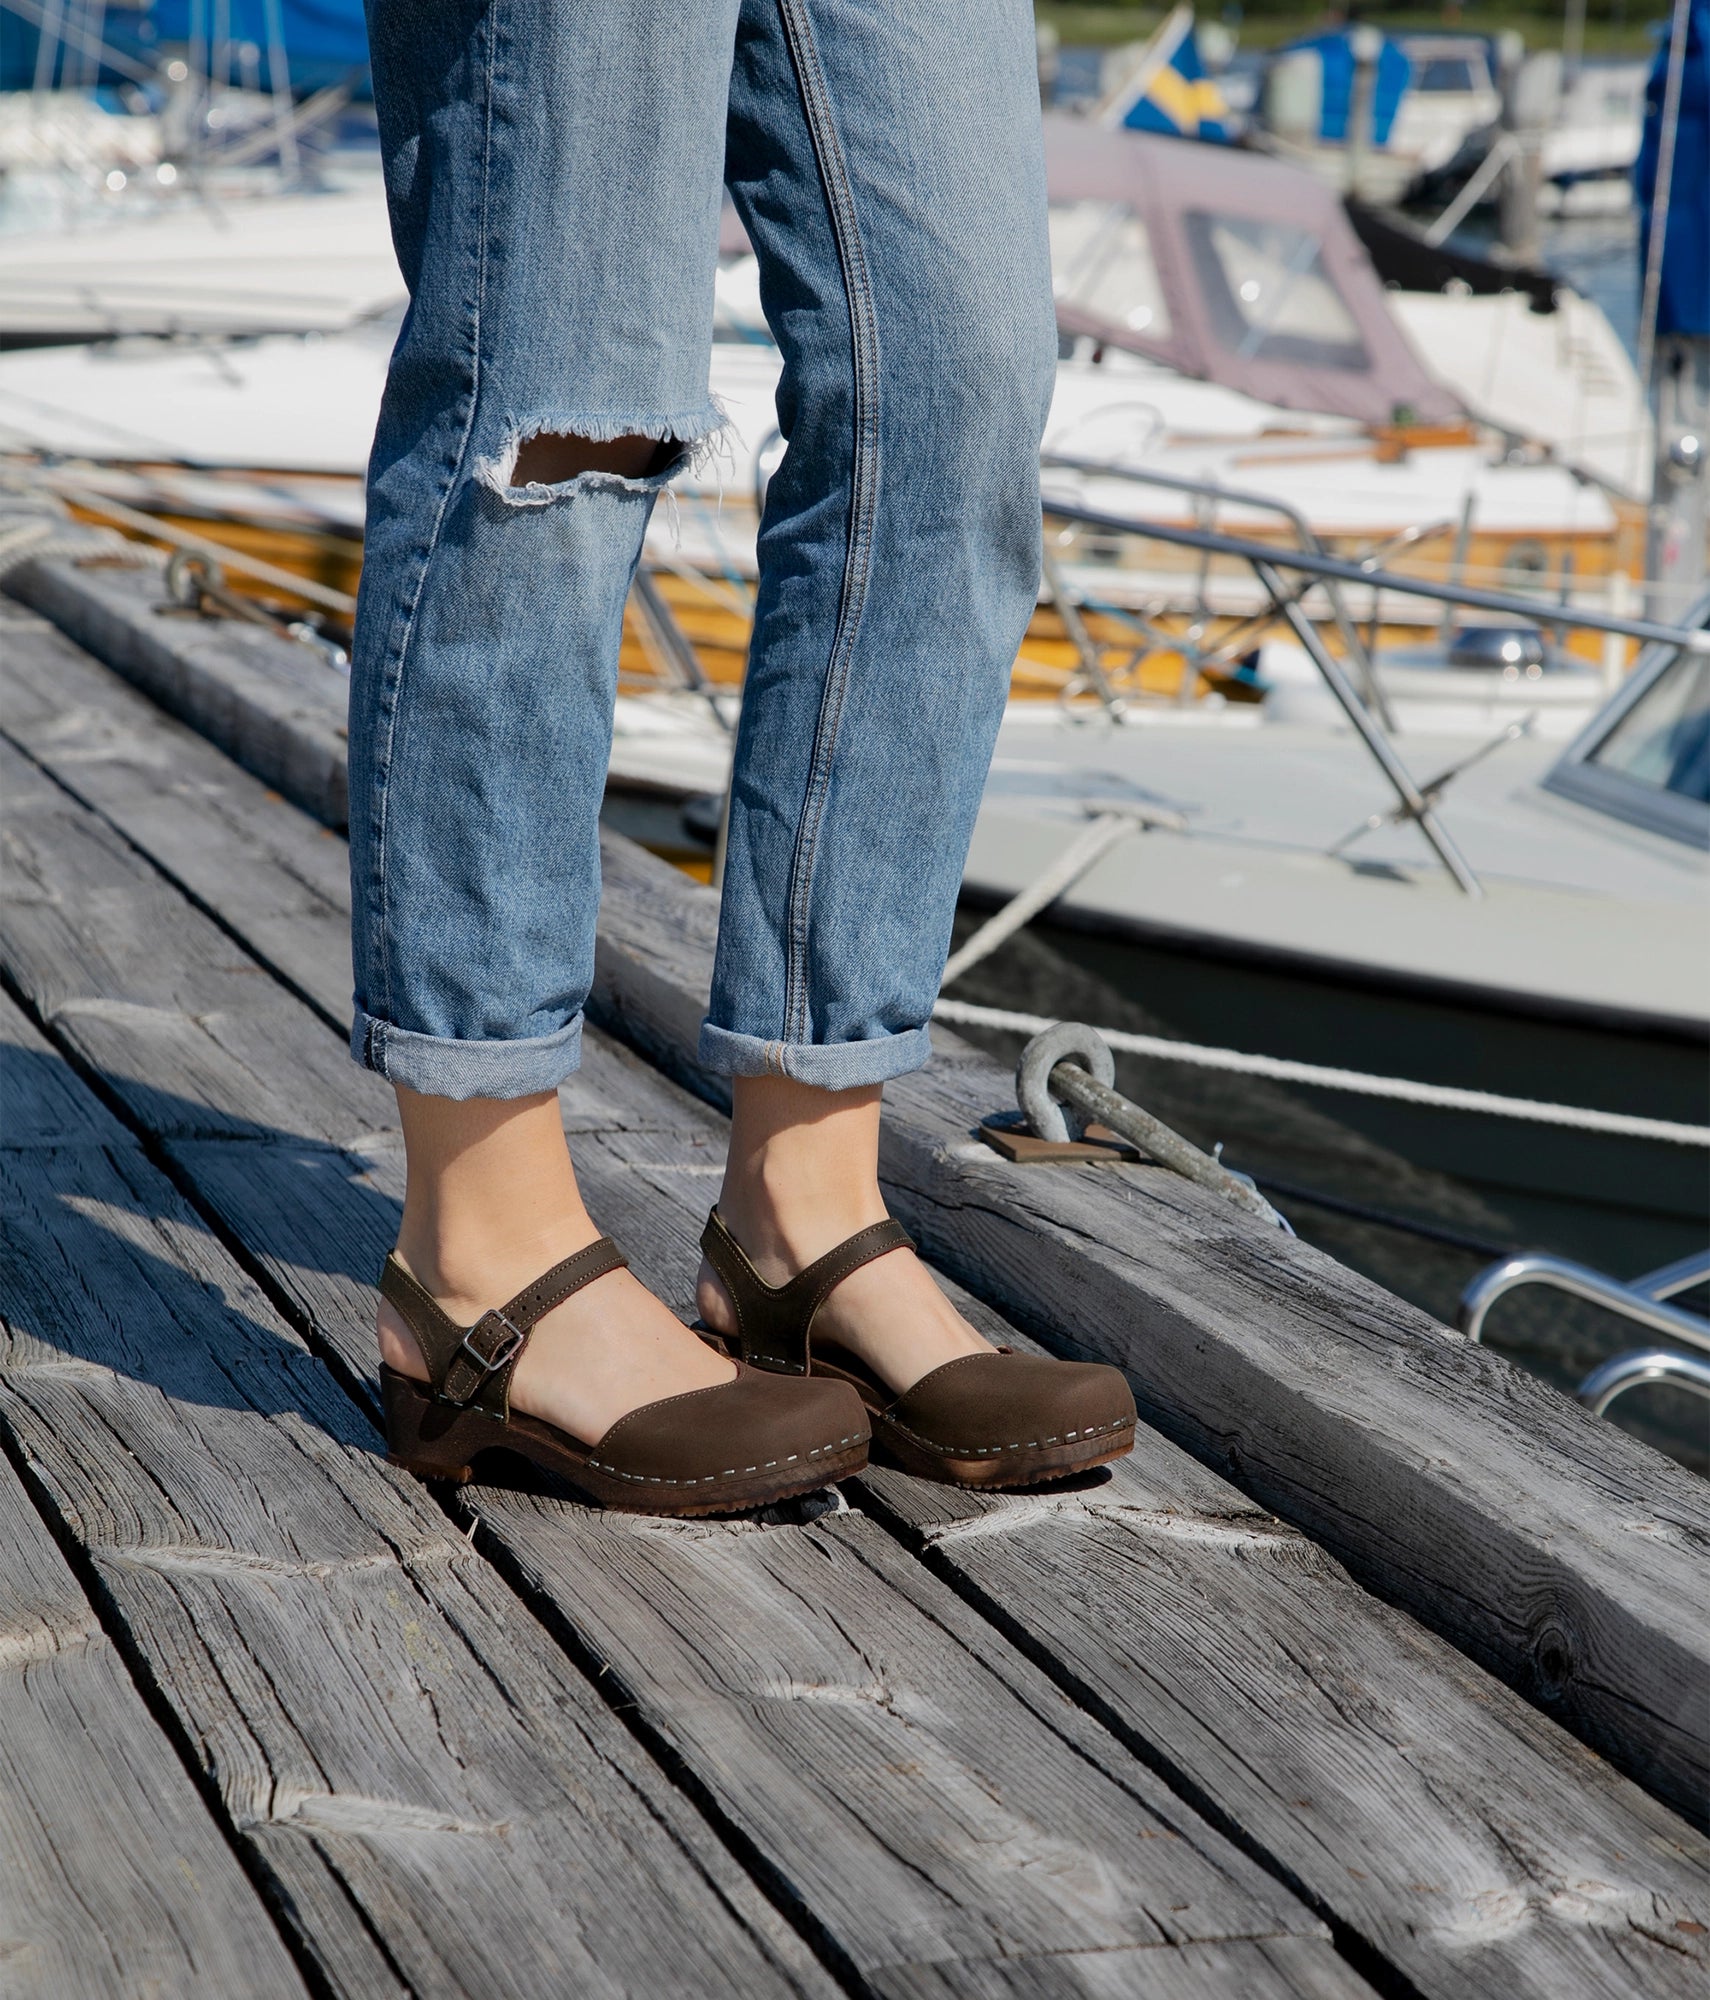 woman standing by a dock wearing ripped jeans and classic low heeled closed-toe sandal in dark brown nubuck leather stapled on a dark wooden base